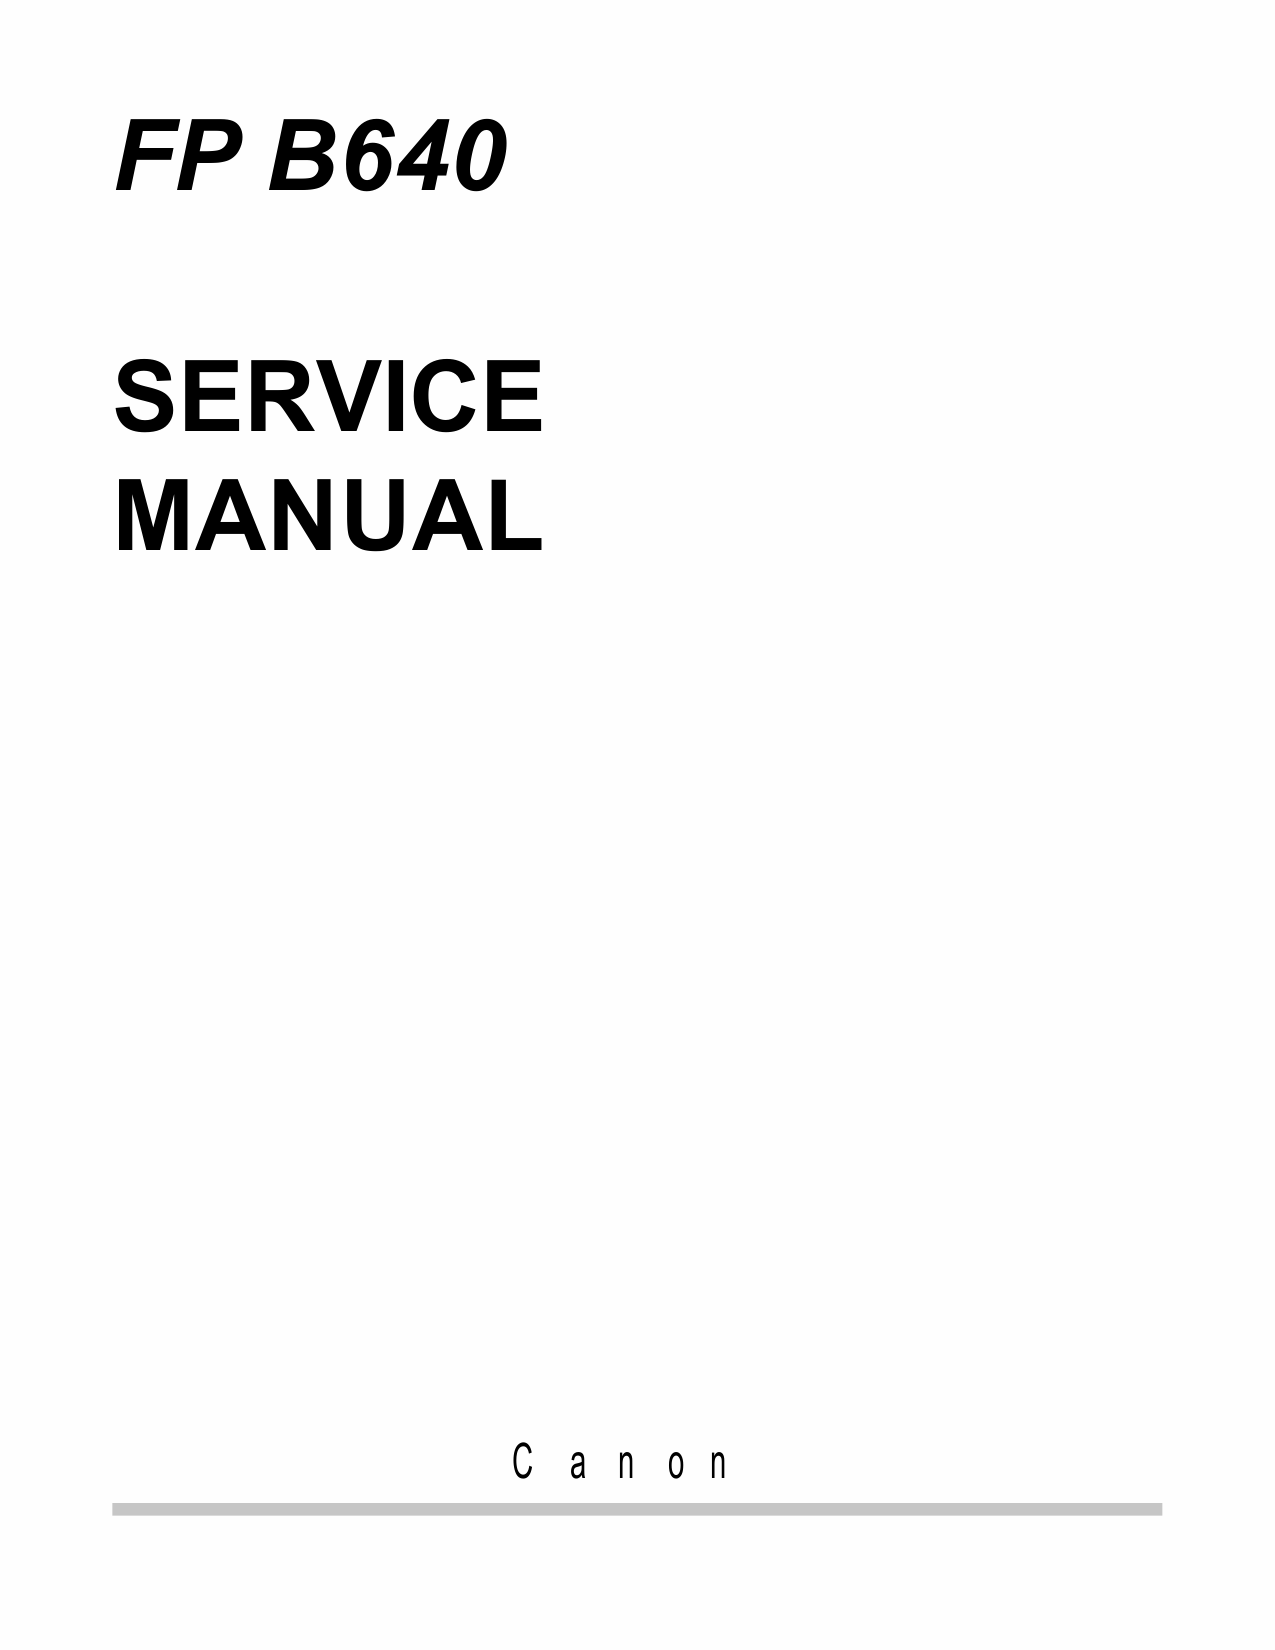 Canon FAX FP-B640 Parts and Service Manual-1